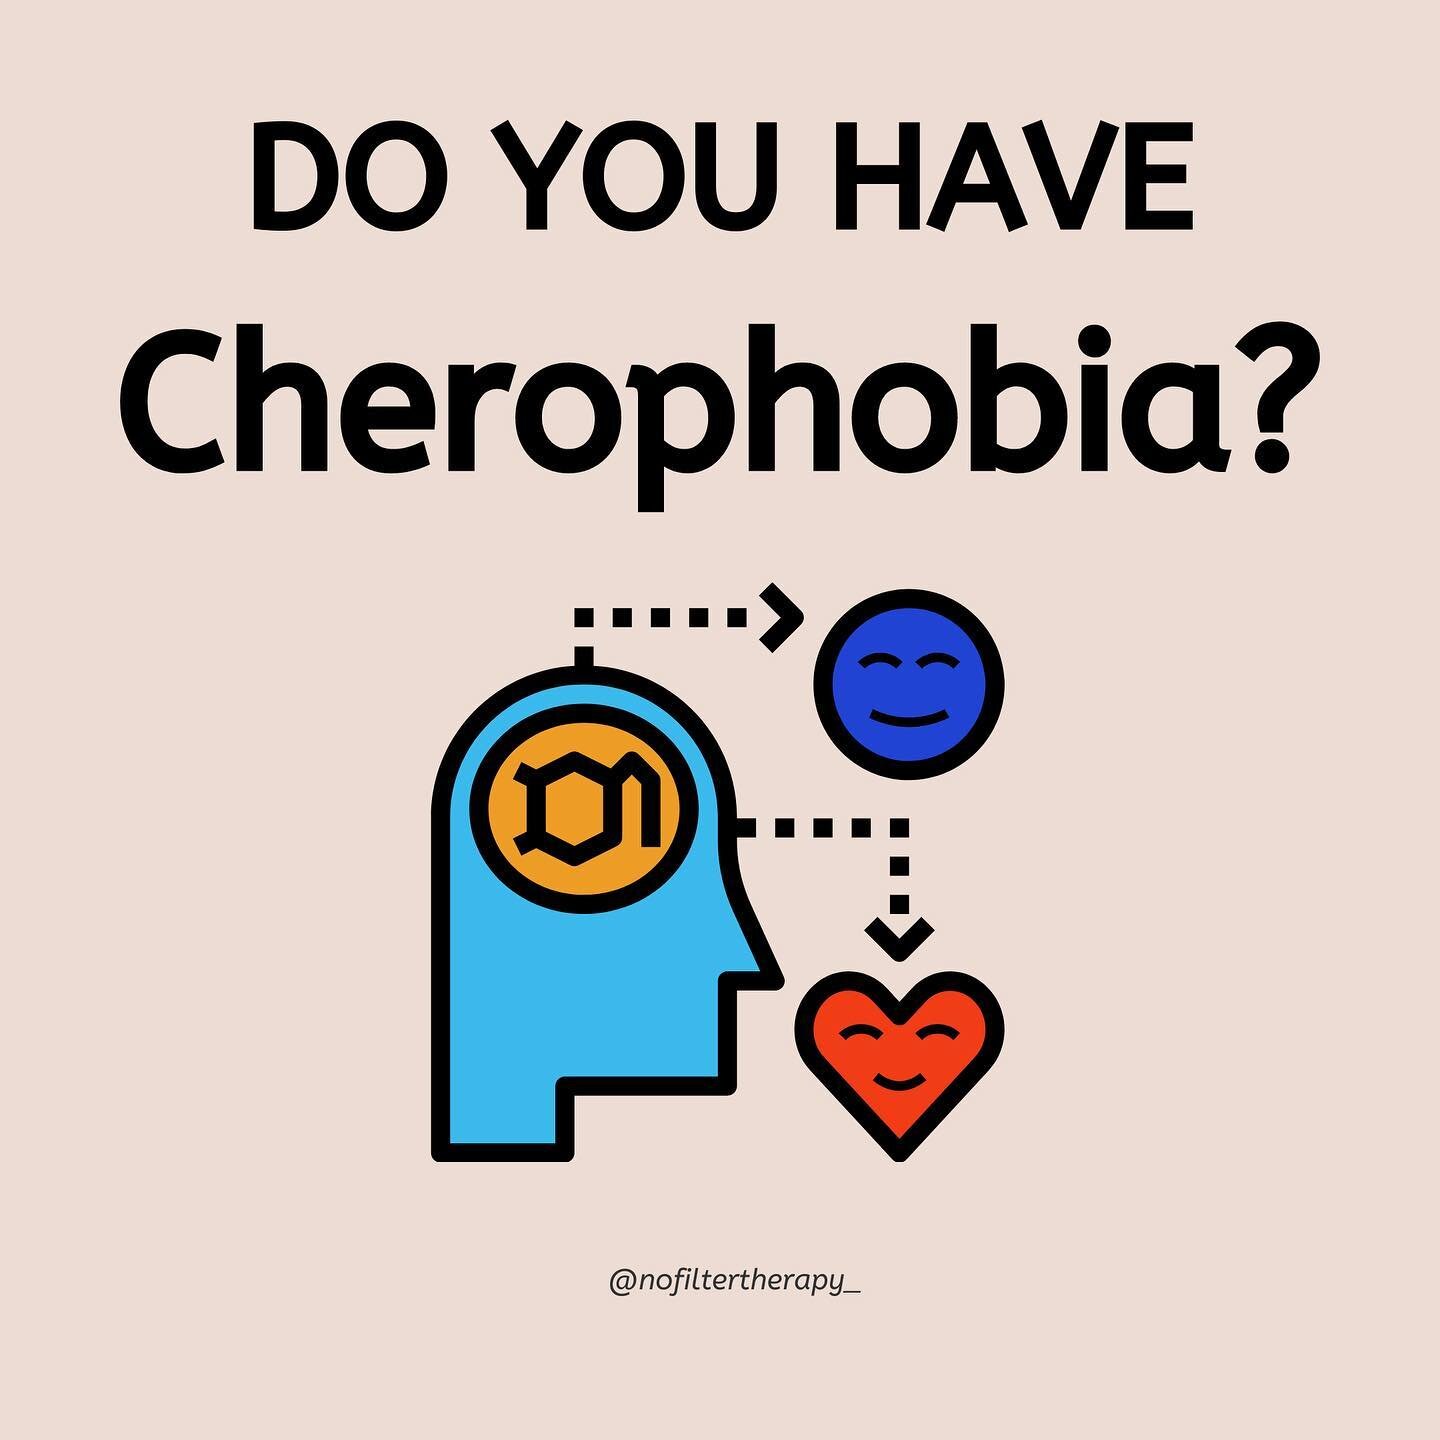 ❤️ Have you heard of cherophobia? 🤔 You may be surprised but many people struggle with this after experiencing varying types of little t and big T - trauma.

💛 I&rsquo;ve included some reflection questions to help you assess if cherophobia has been